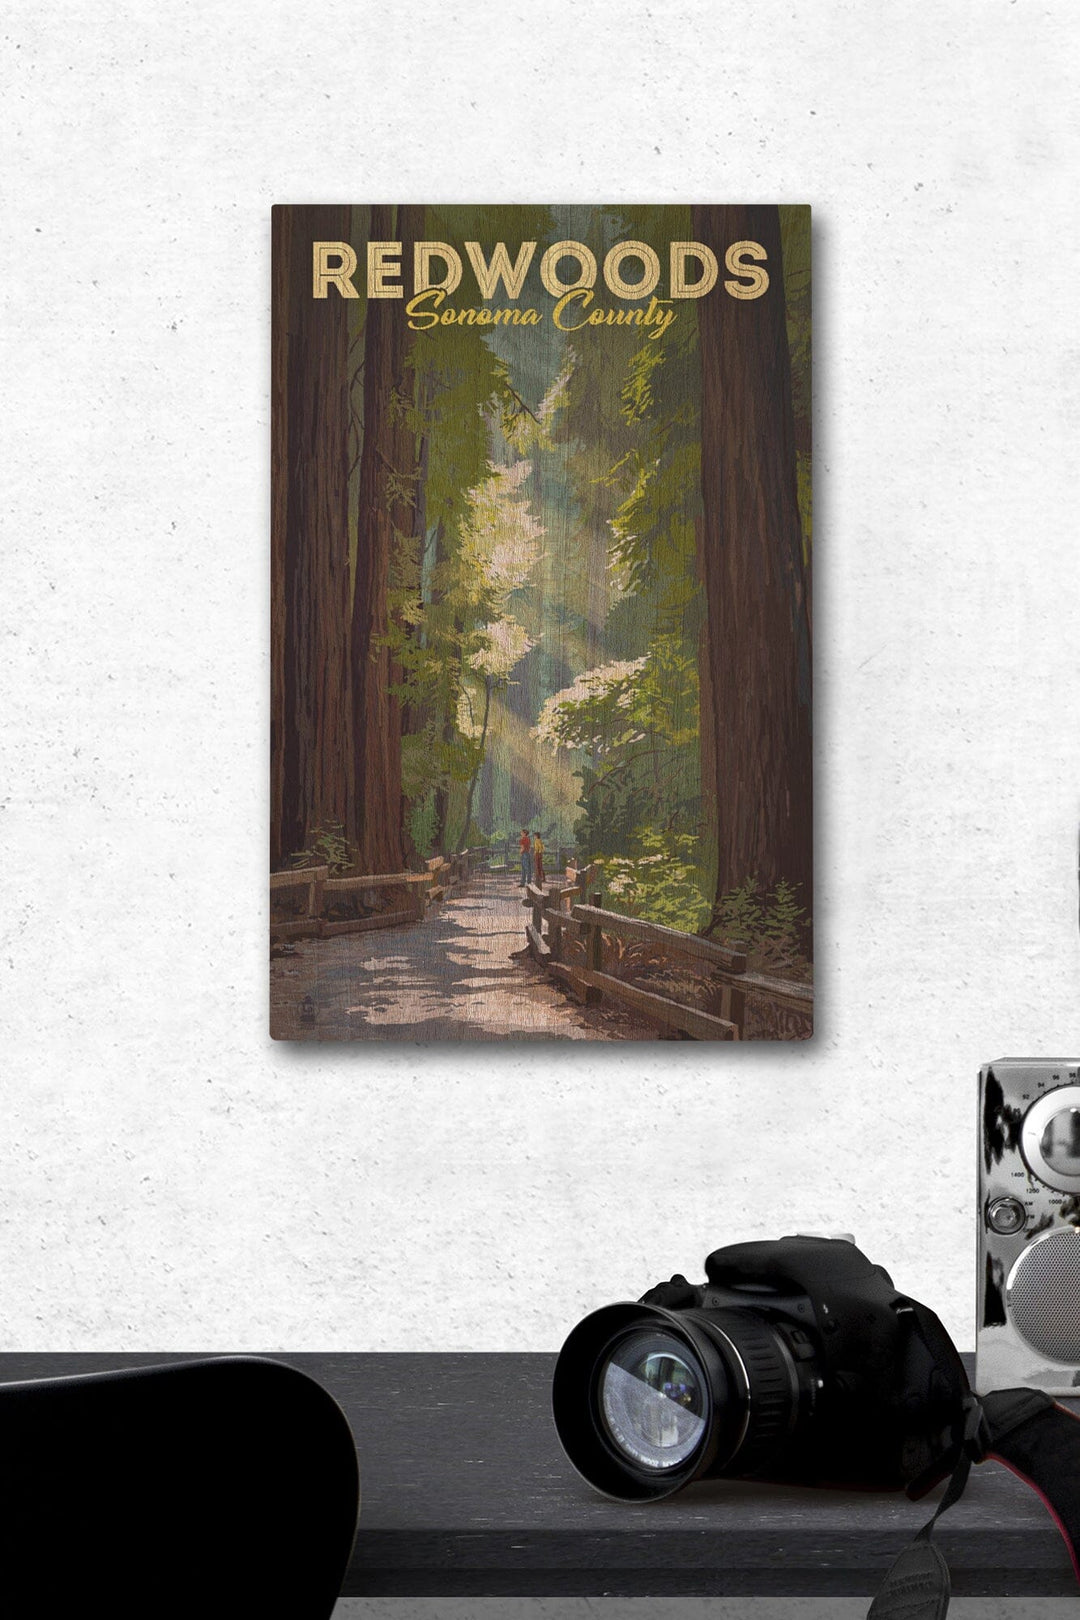 Sonoma County, California, Redwoods, Pathway in Trees, Lantern Press Artwork, Wood Signs and Postcards Wood Lantern Press 12 x 18 Wood Gallery Print 